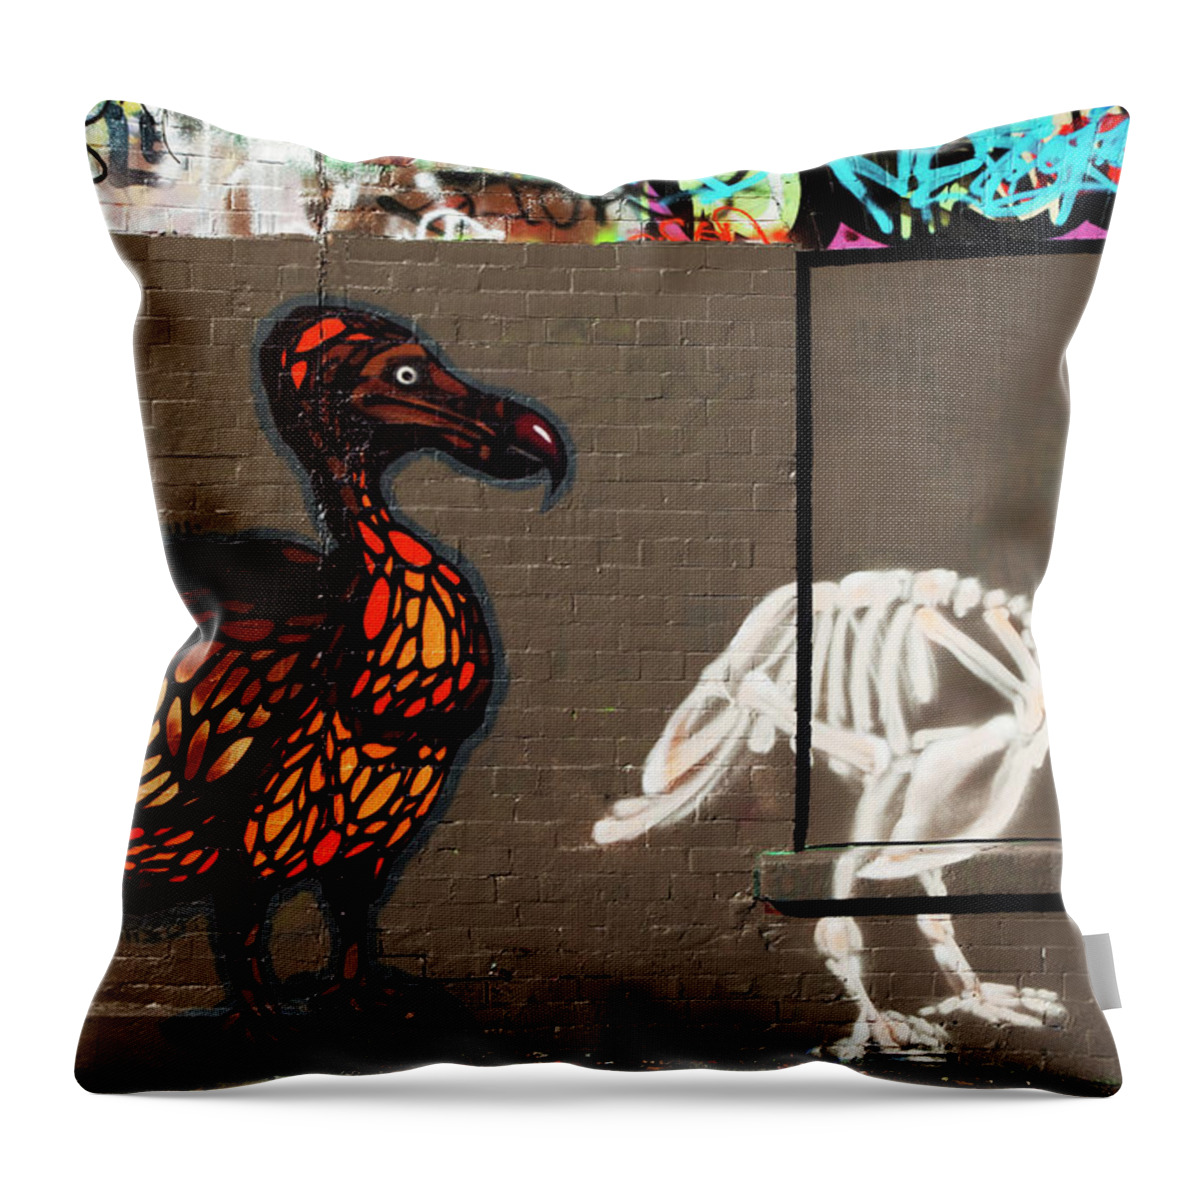 Photography Throw Pillow featuring the photograph Artistic Graffiti On The U2 Wall #1 by Panoramic Images